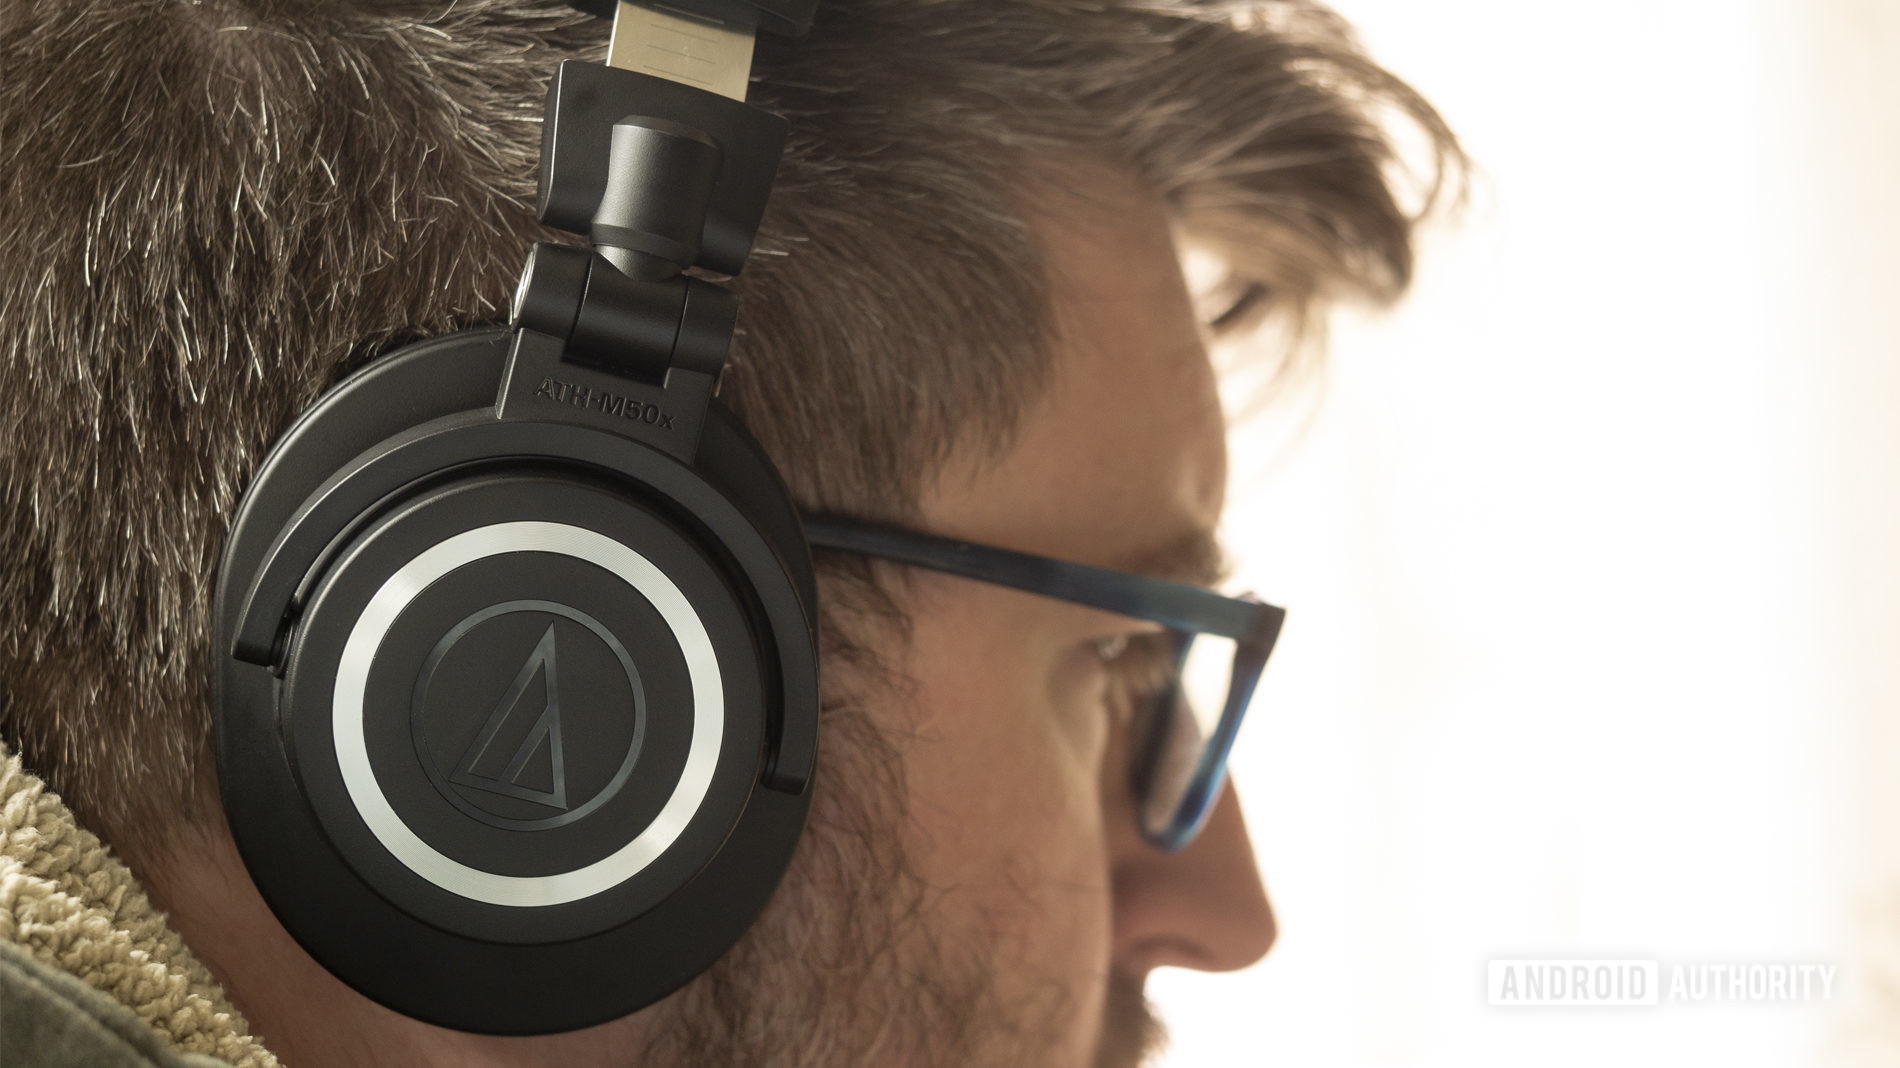 A photo of the Audio-Technica ATH-M50xBT on a man's head.